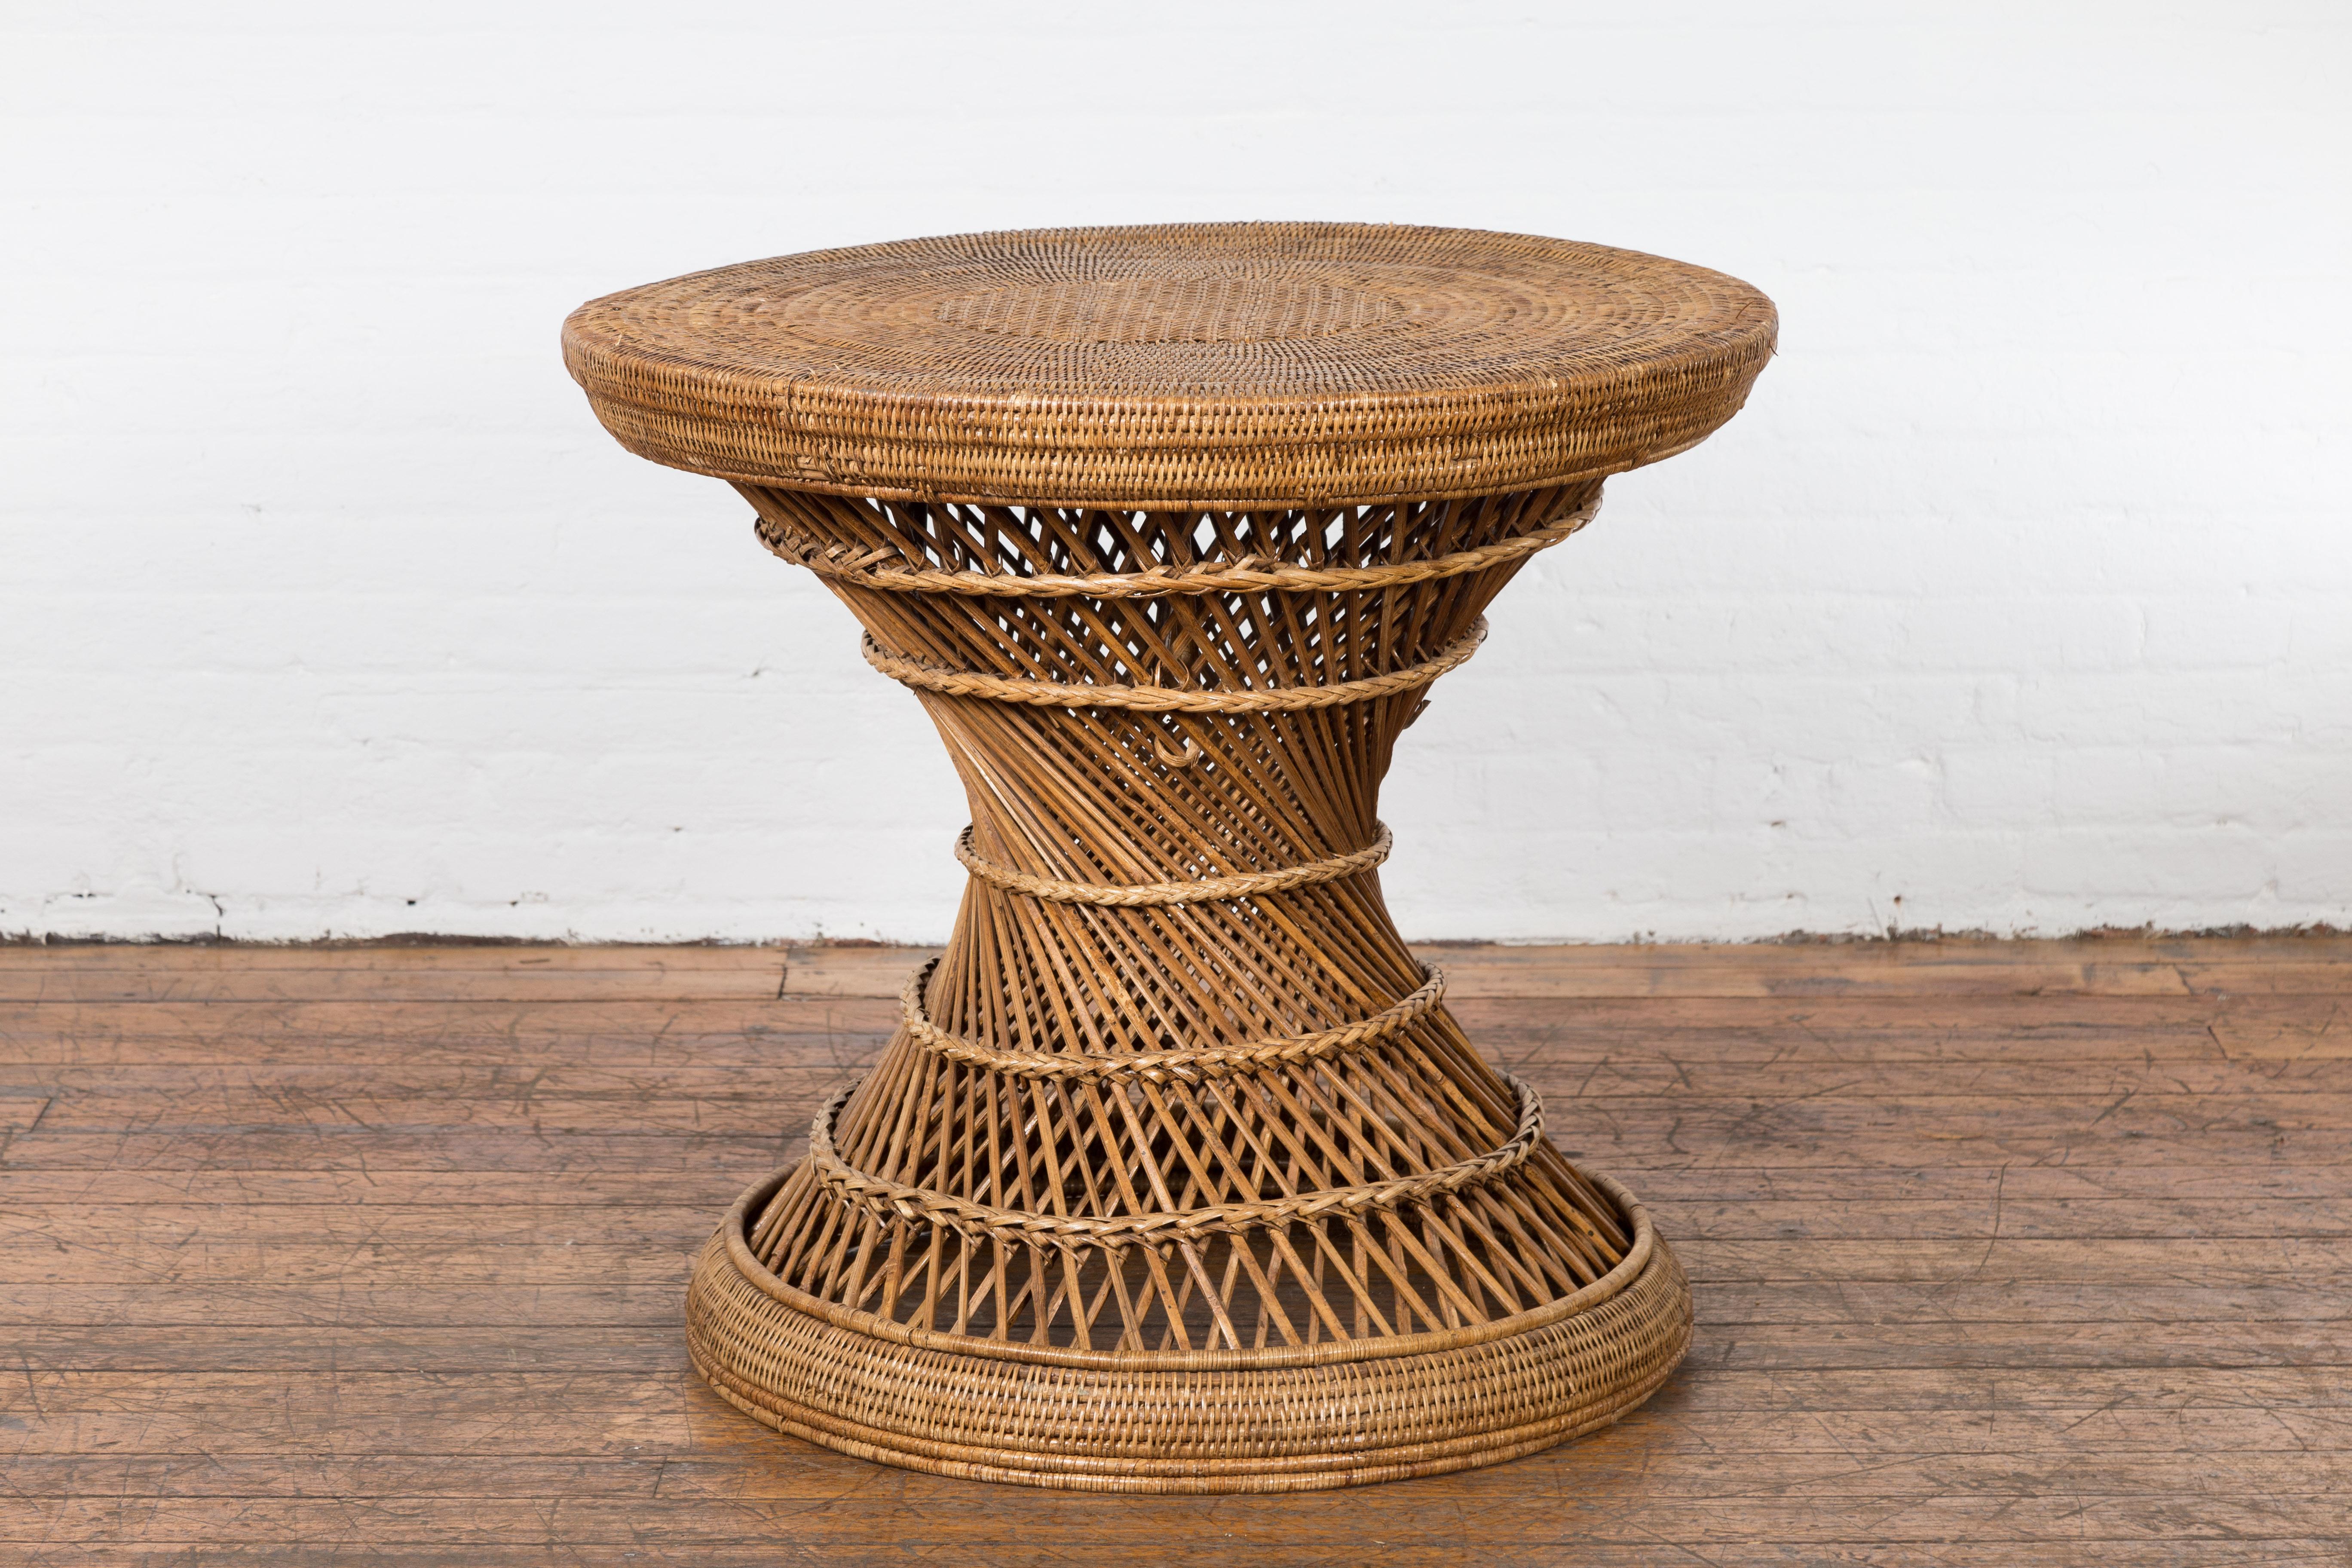 A rustic country style Thai drum table from the mid 20th century made of woven rattan with circular top, hourglass shape and twisted center. Evoking the warmth and charm of mid 20th-century Thai craftsmanship, this rustic country style drum table is